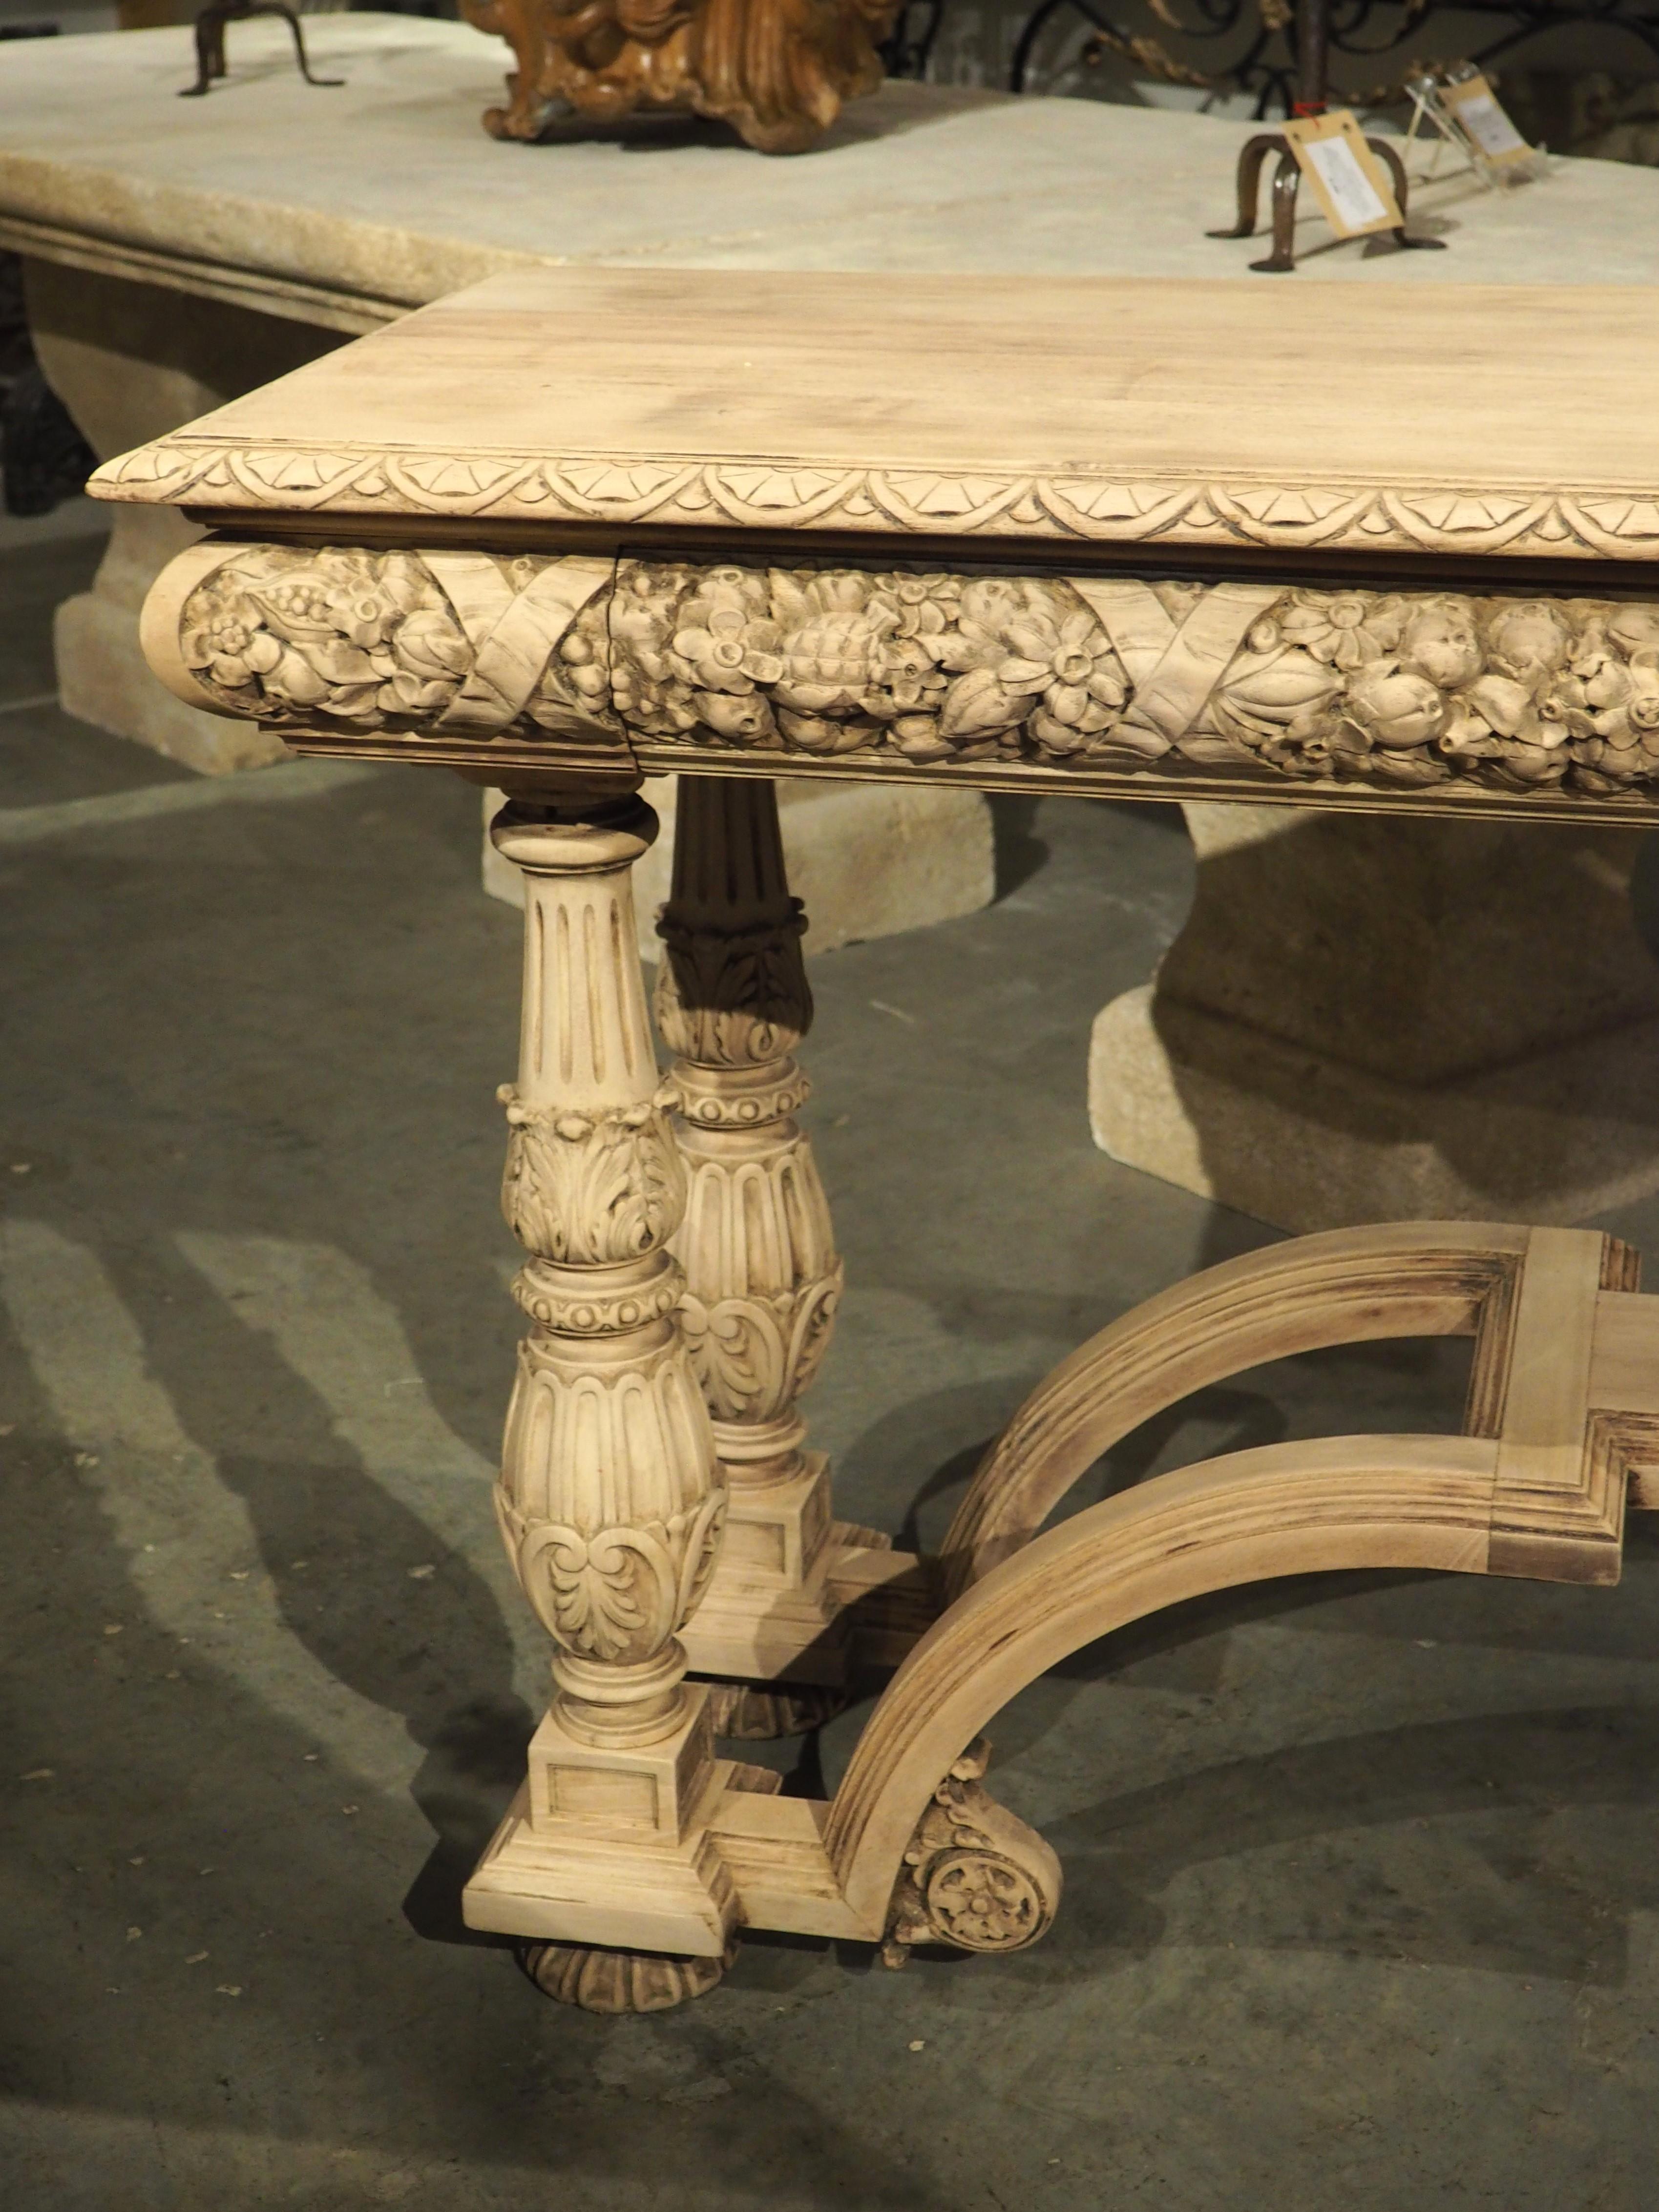 At over six feet wide and three feet tall, this walnut console table has a commanding presence. Hand-carved in France during the late 1800s, the wood has been bleached more recently, resulting in a very pleasing beige color that accentuates the